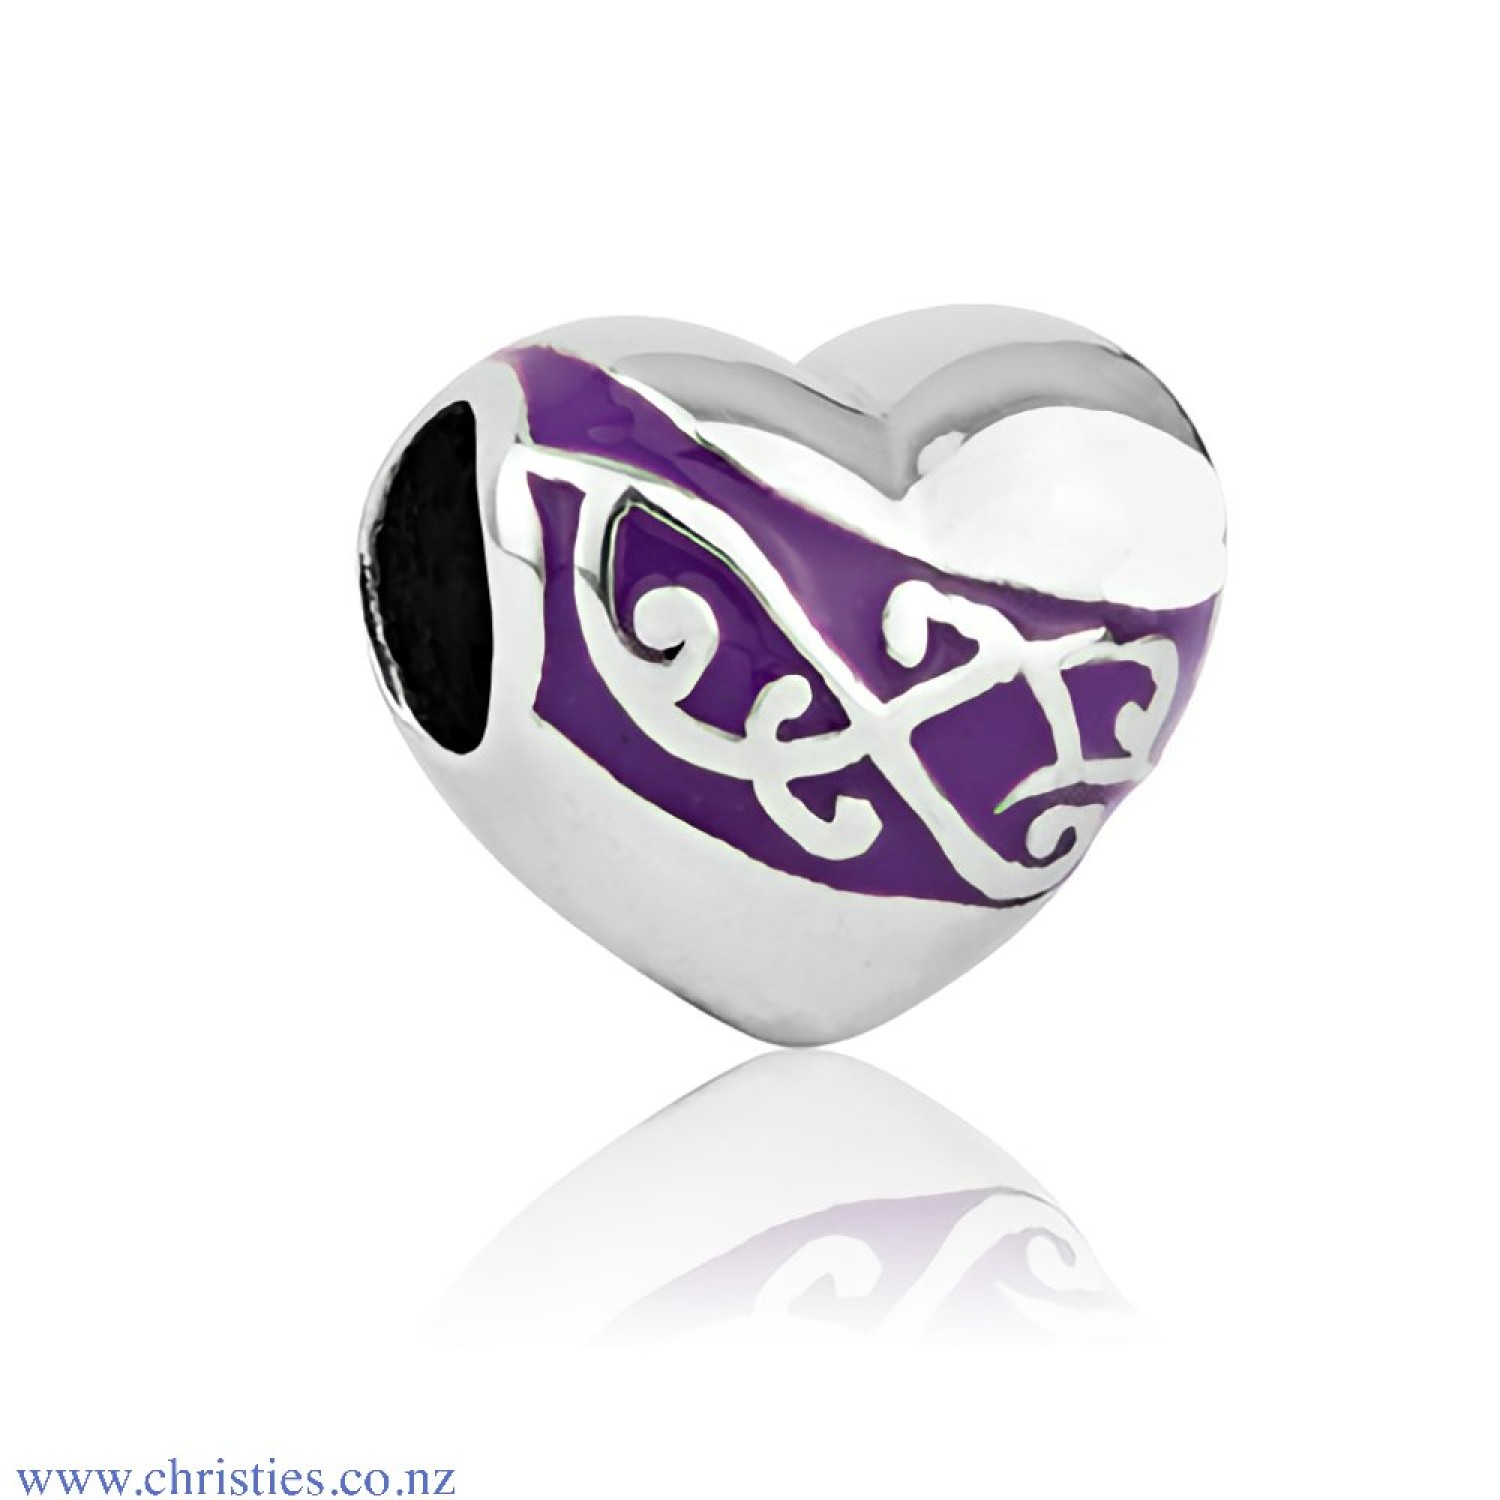 LKE068 Evolve Jewellery Heart of Love Charm. Representing your deepest admiration and care, Evolve's Heart of Love charm celebrates affection.The intricate koru design symbolises the many branches of love shared with close family and friends. Special Offe